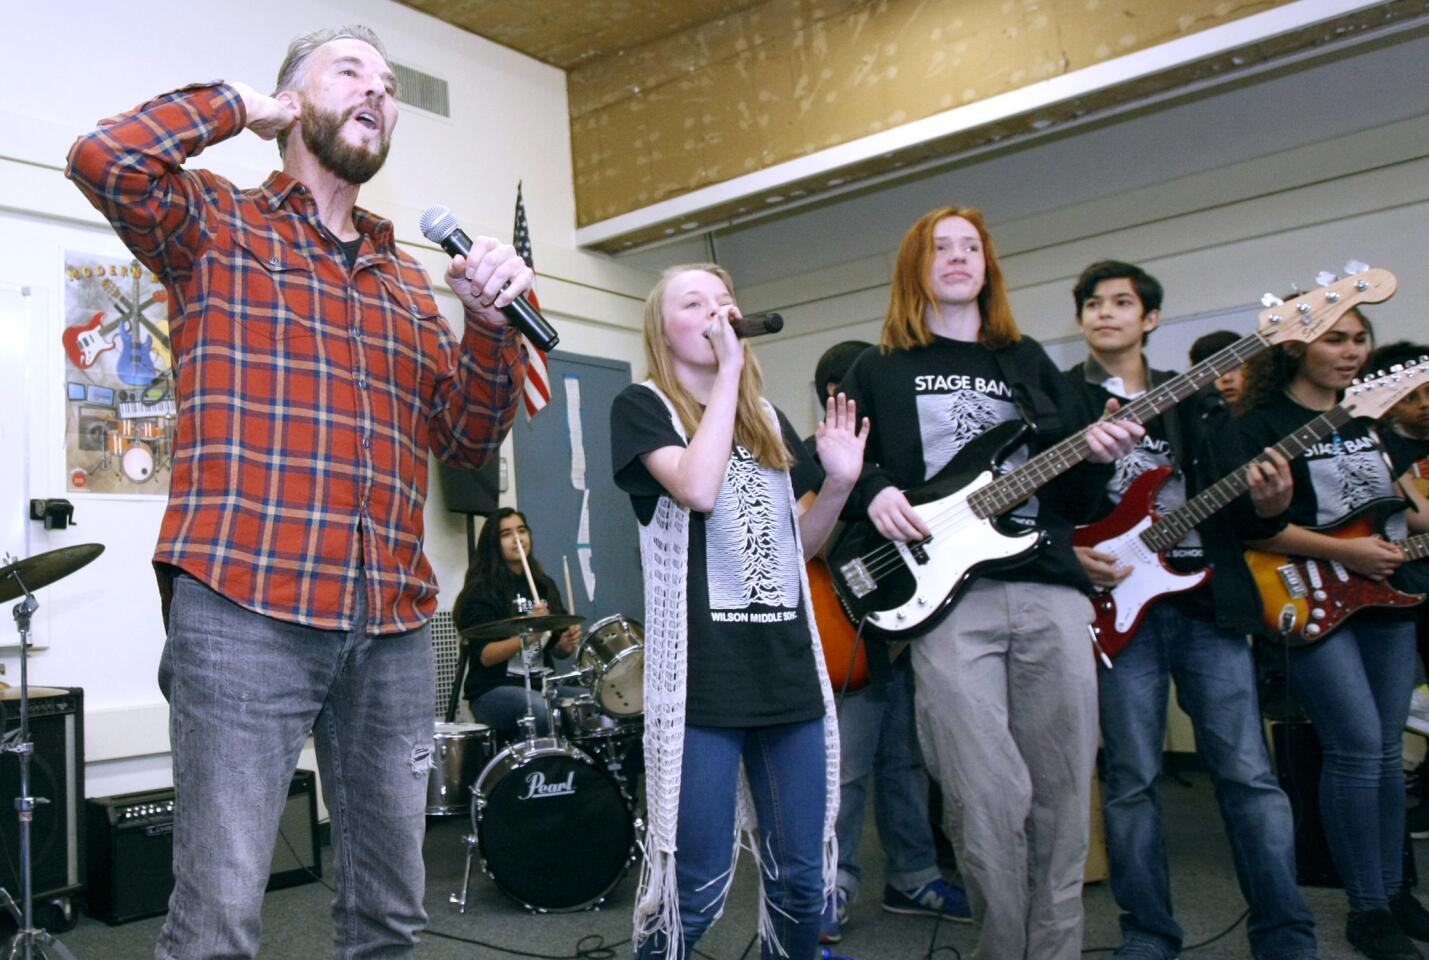 Wilson Middle School Stage Class students sing and play Footloose with Kenny Loggins during a special visit by the iconic American singer and songwriter to the Glendale school in Thursday, Jan. 26, 2017. Loggins gave the class tips about the music world and unveiled brand new instruments donated to the school after he helped raise $1.1 million at national nonprofit Little Kids Rock's benefit in New York City recently.